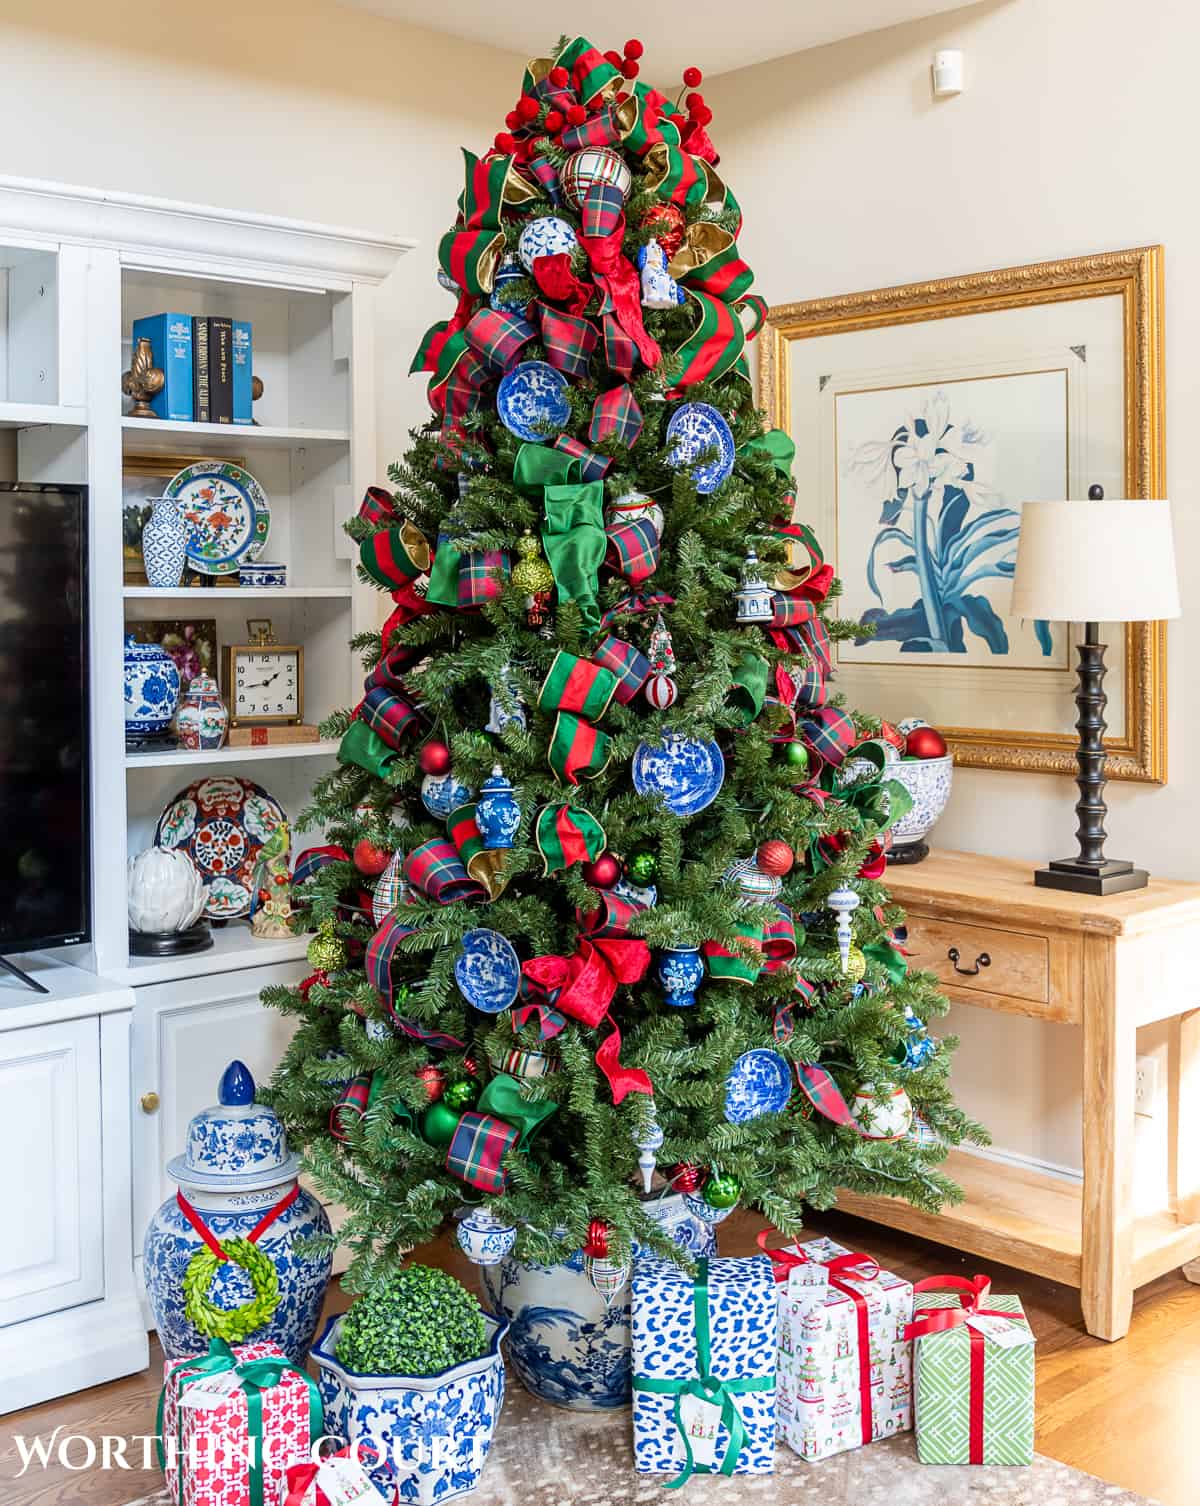 Christmas tree with traditional decorations in red, green, blue and white in a chinoiserie planters